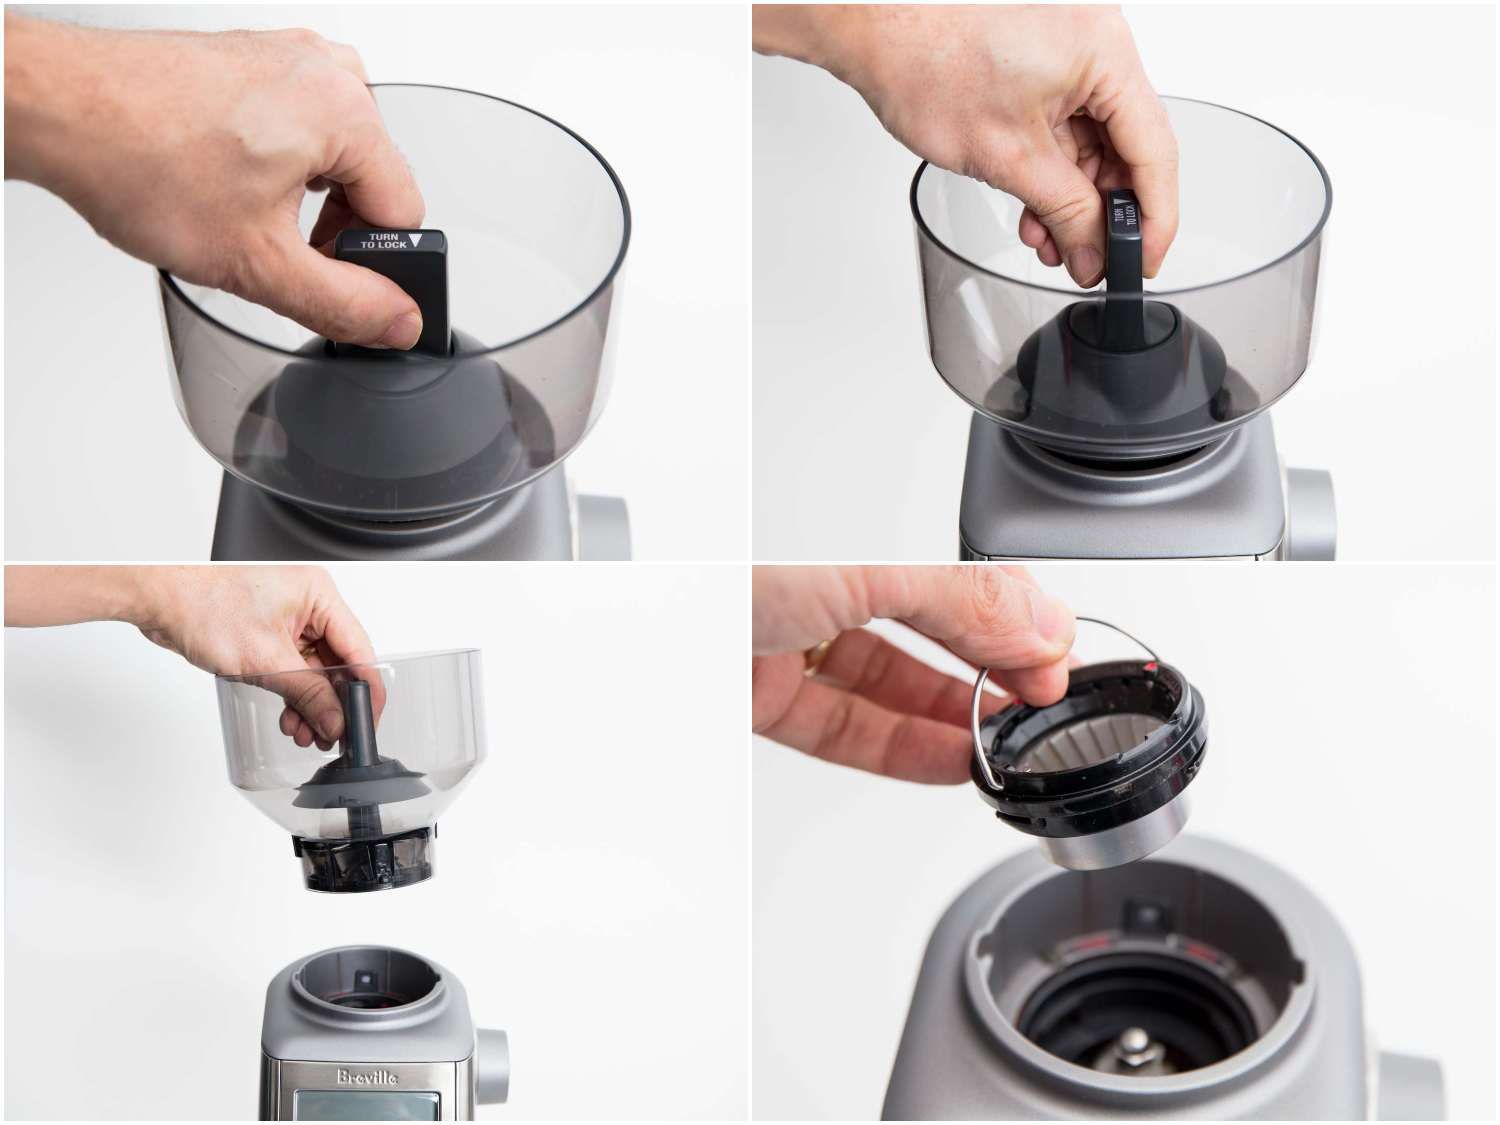 Brevillecoffee grinder's easy to use hopper and burr assembly